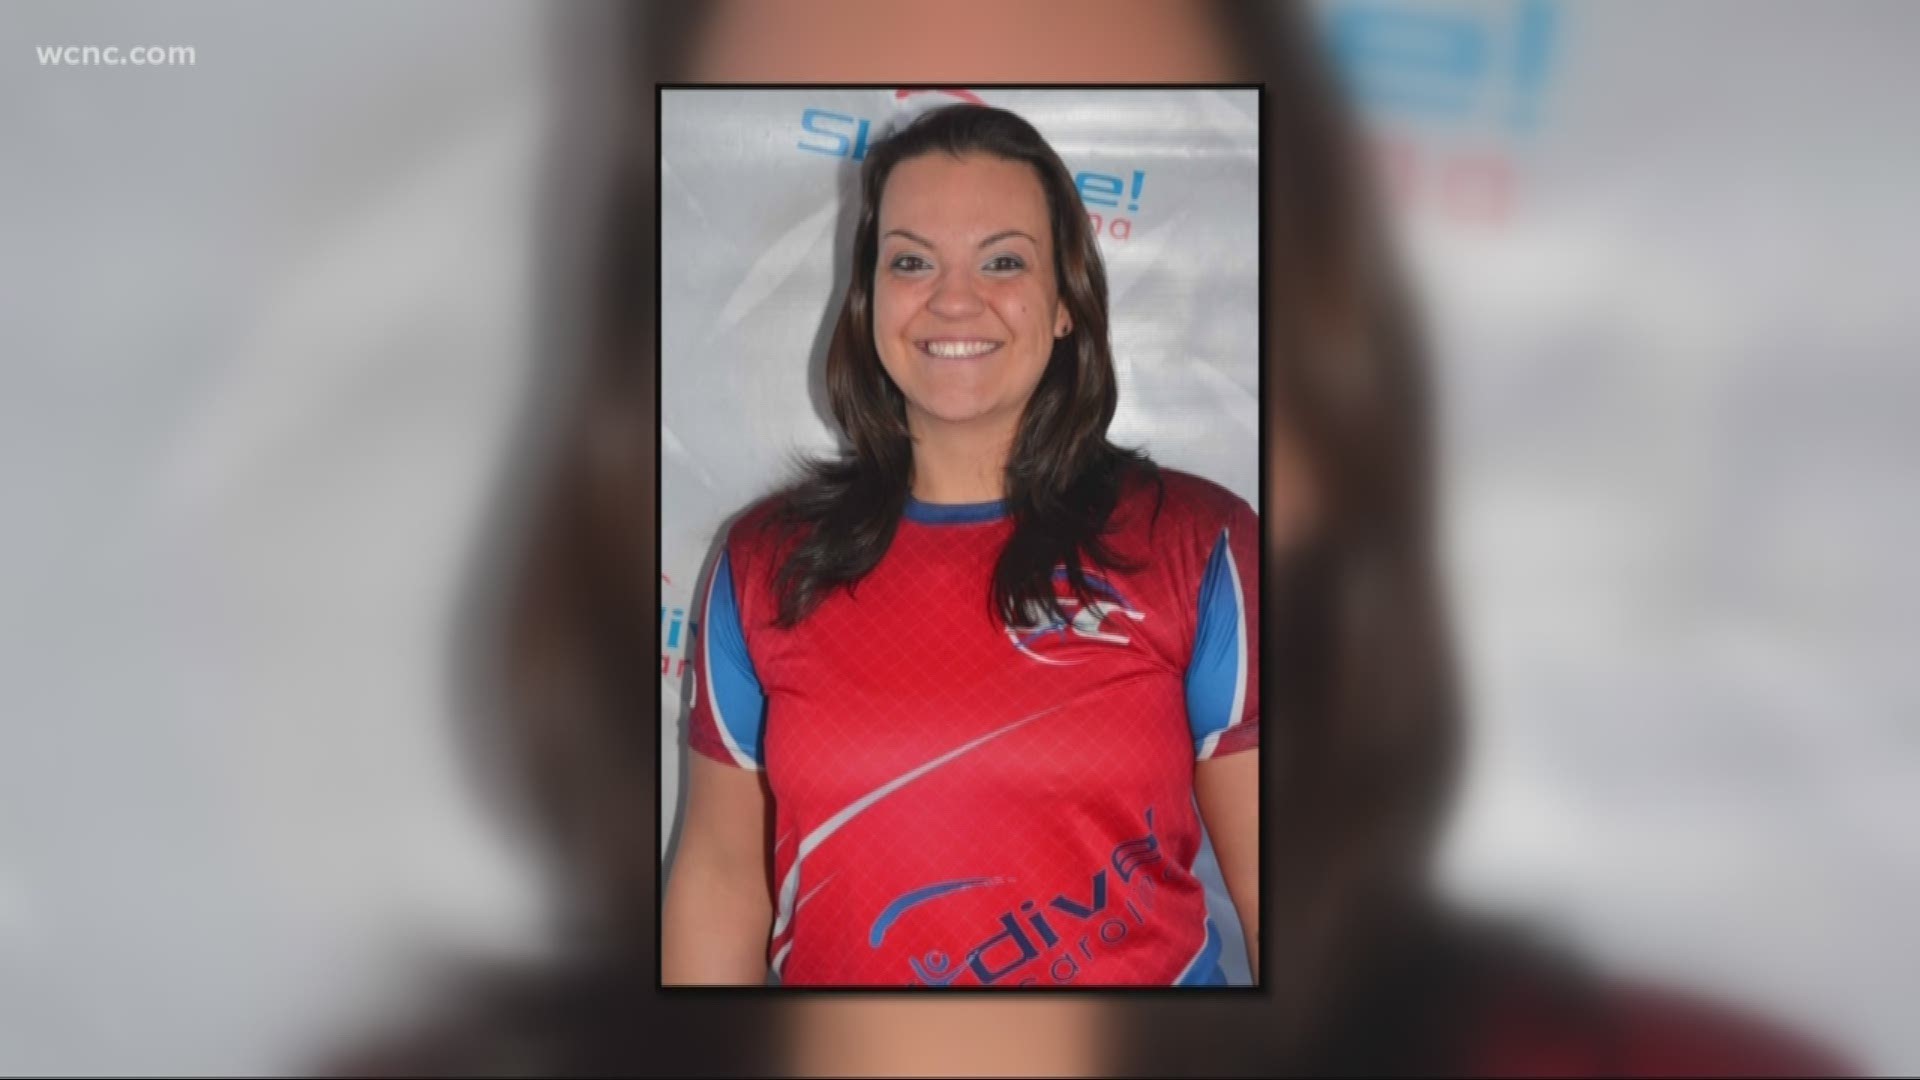 The victim was identified as Amie Jessica Begg. She was an employee at Skydive Carolina.